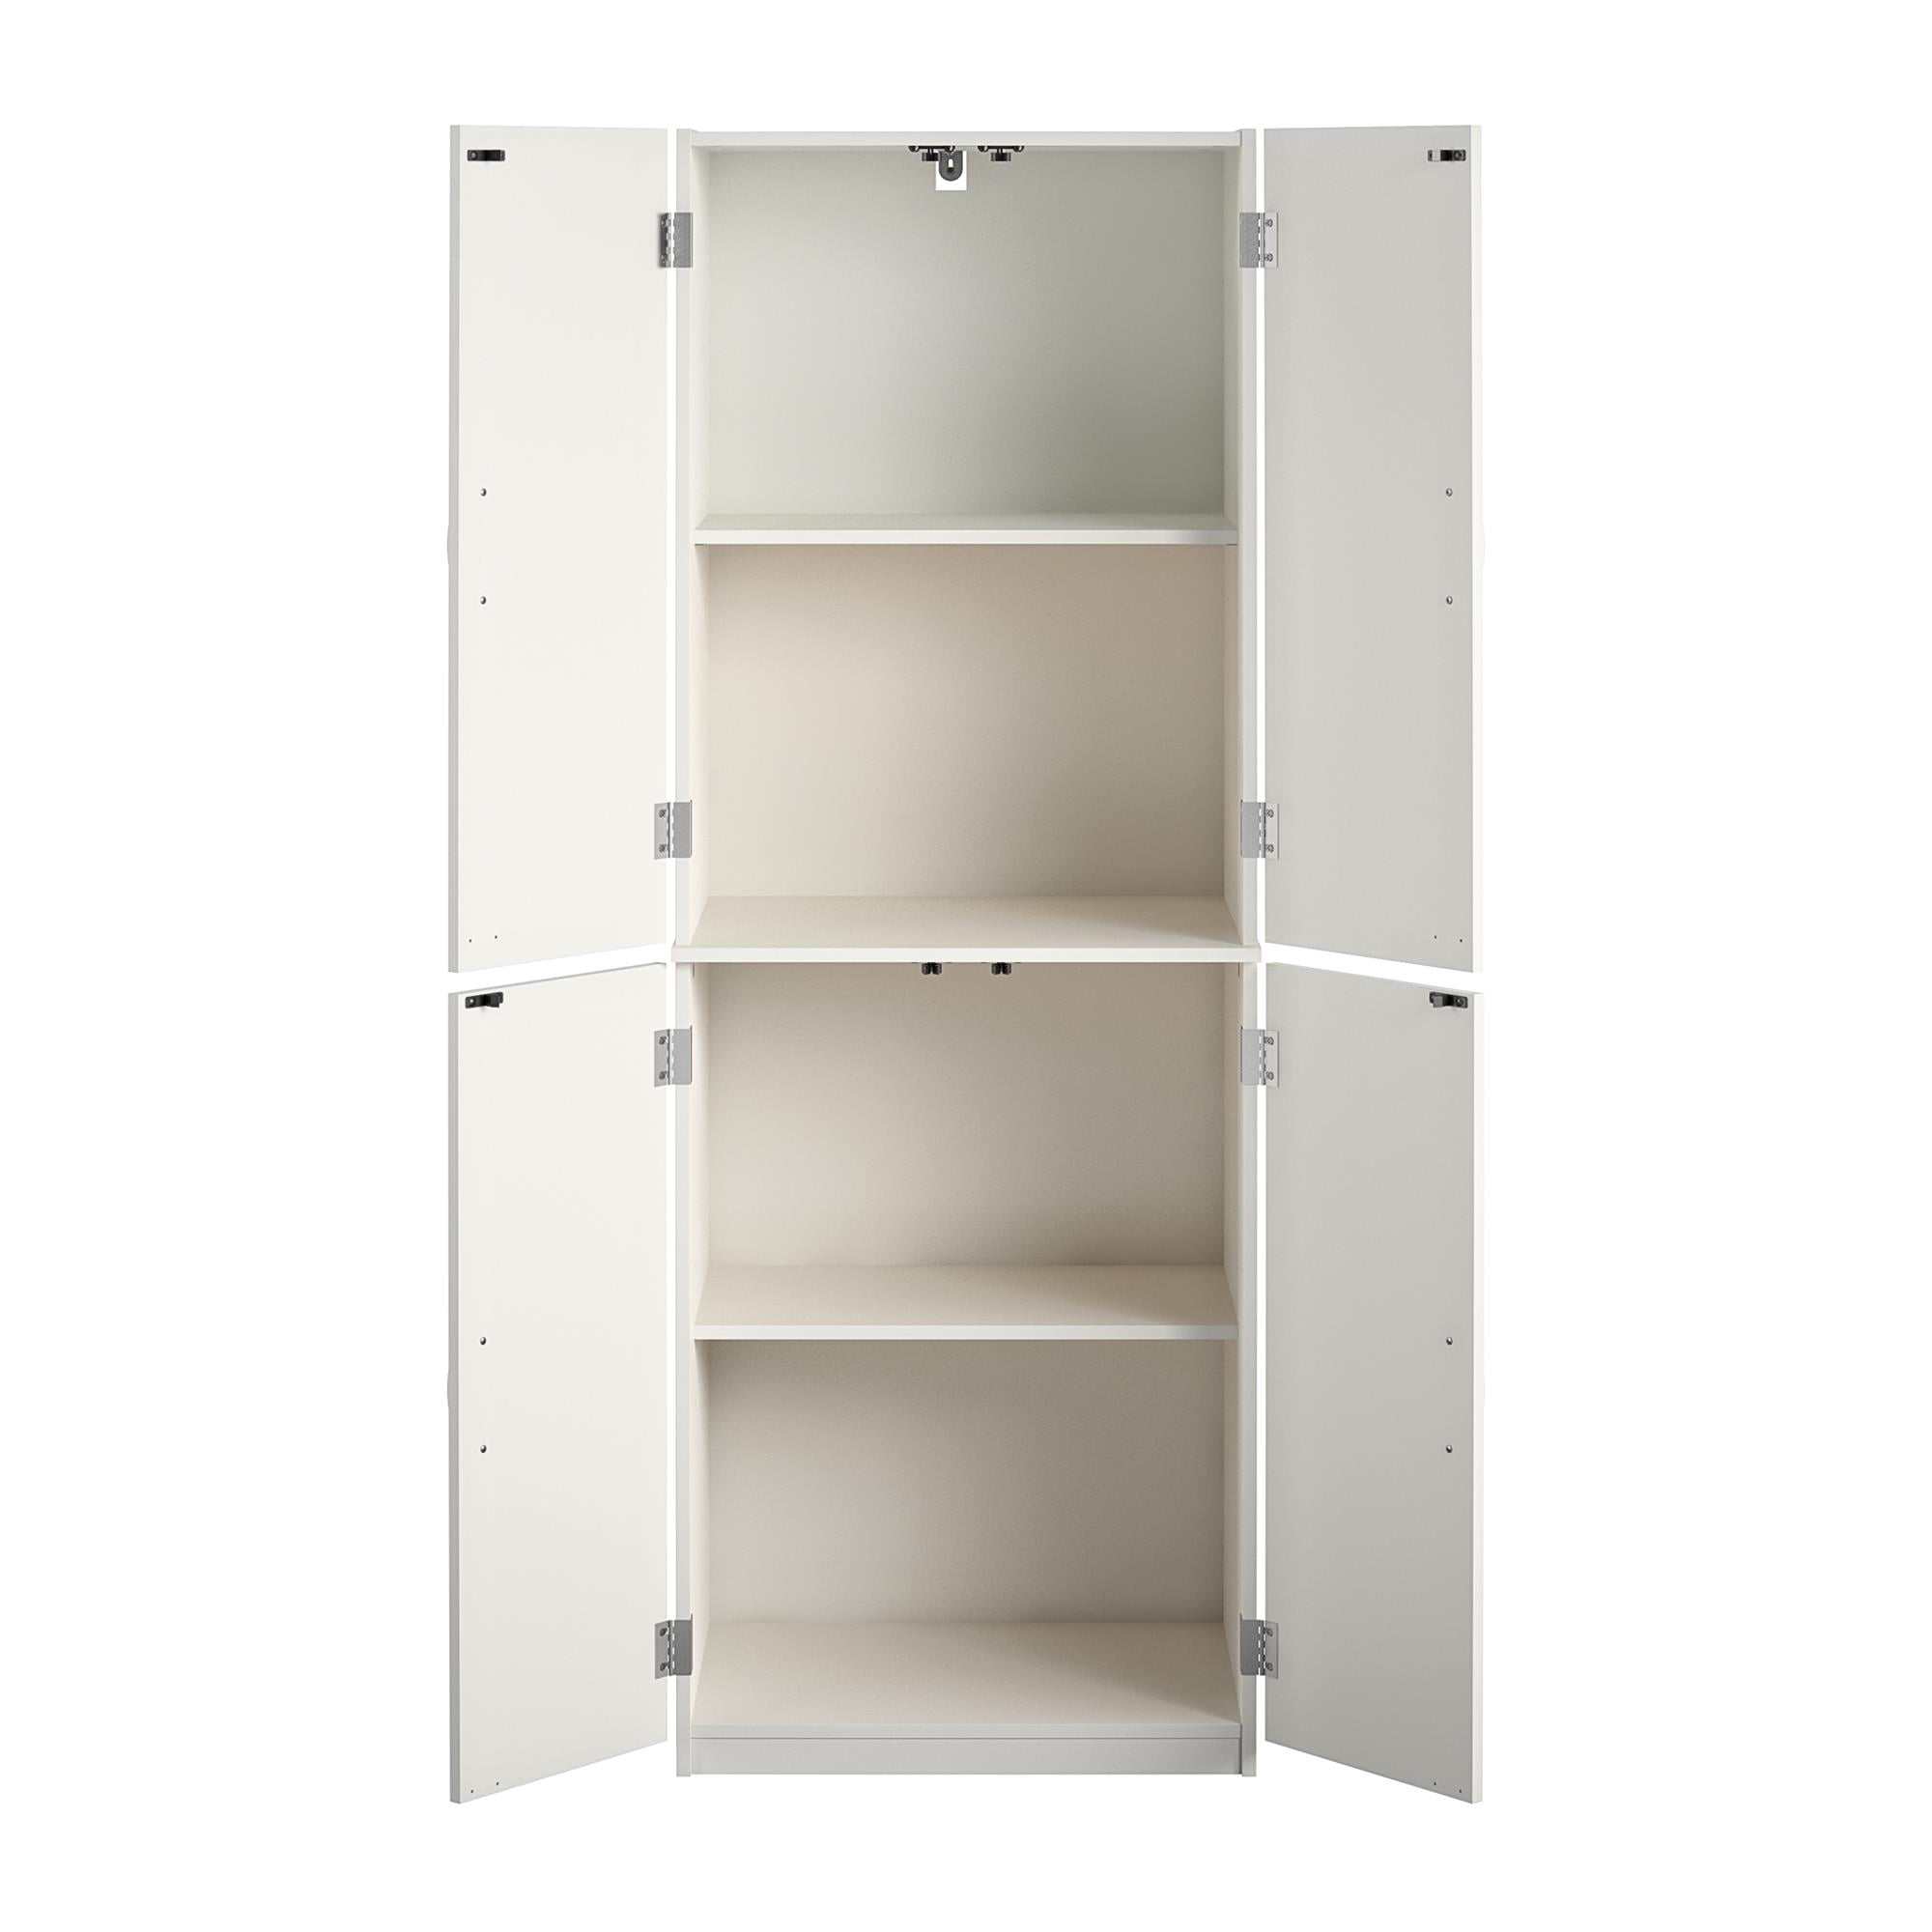 Ample Storage for Kitchen Accessories and Pantry Items Behind Four Doors Easy Assembly Spacious White Stipple Ergonomic Door Handles for Easy-Grip Access Storage Cabinet 